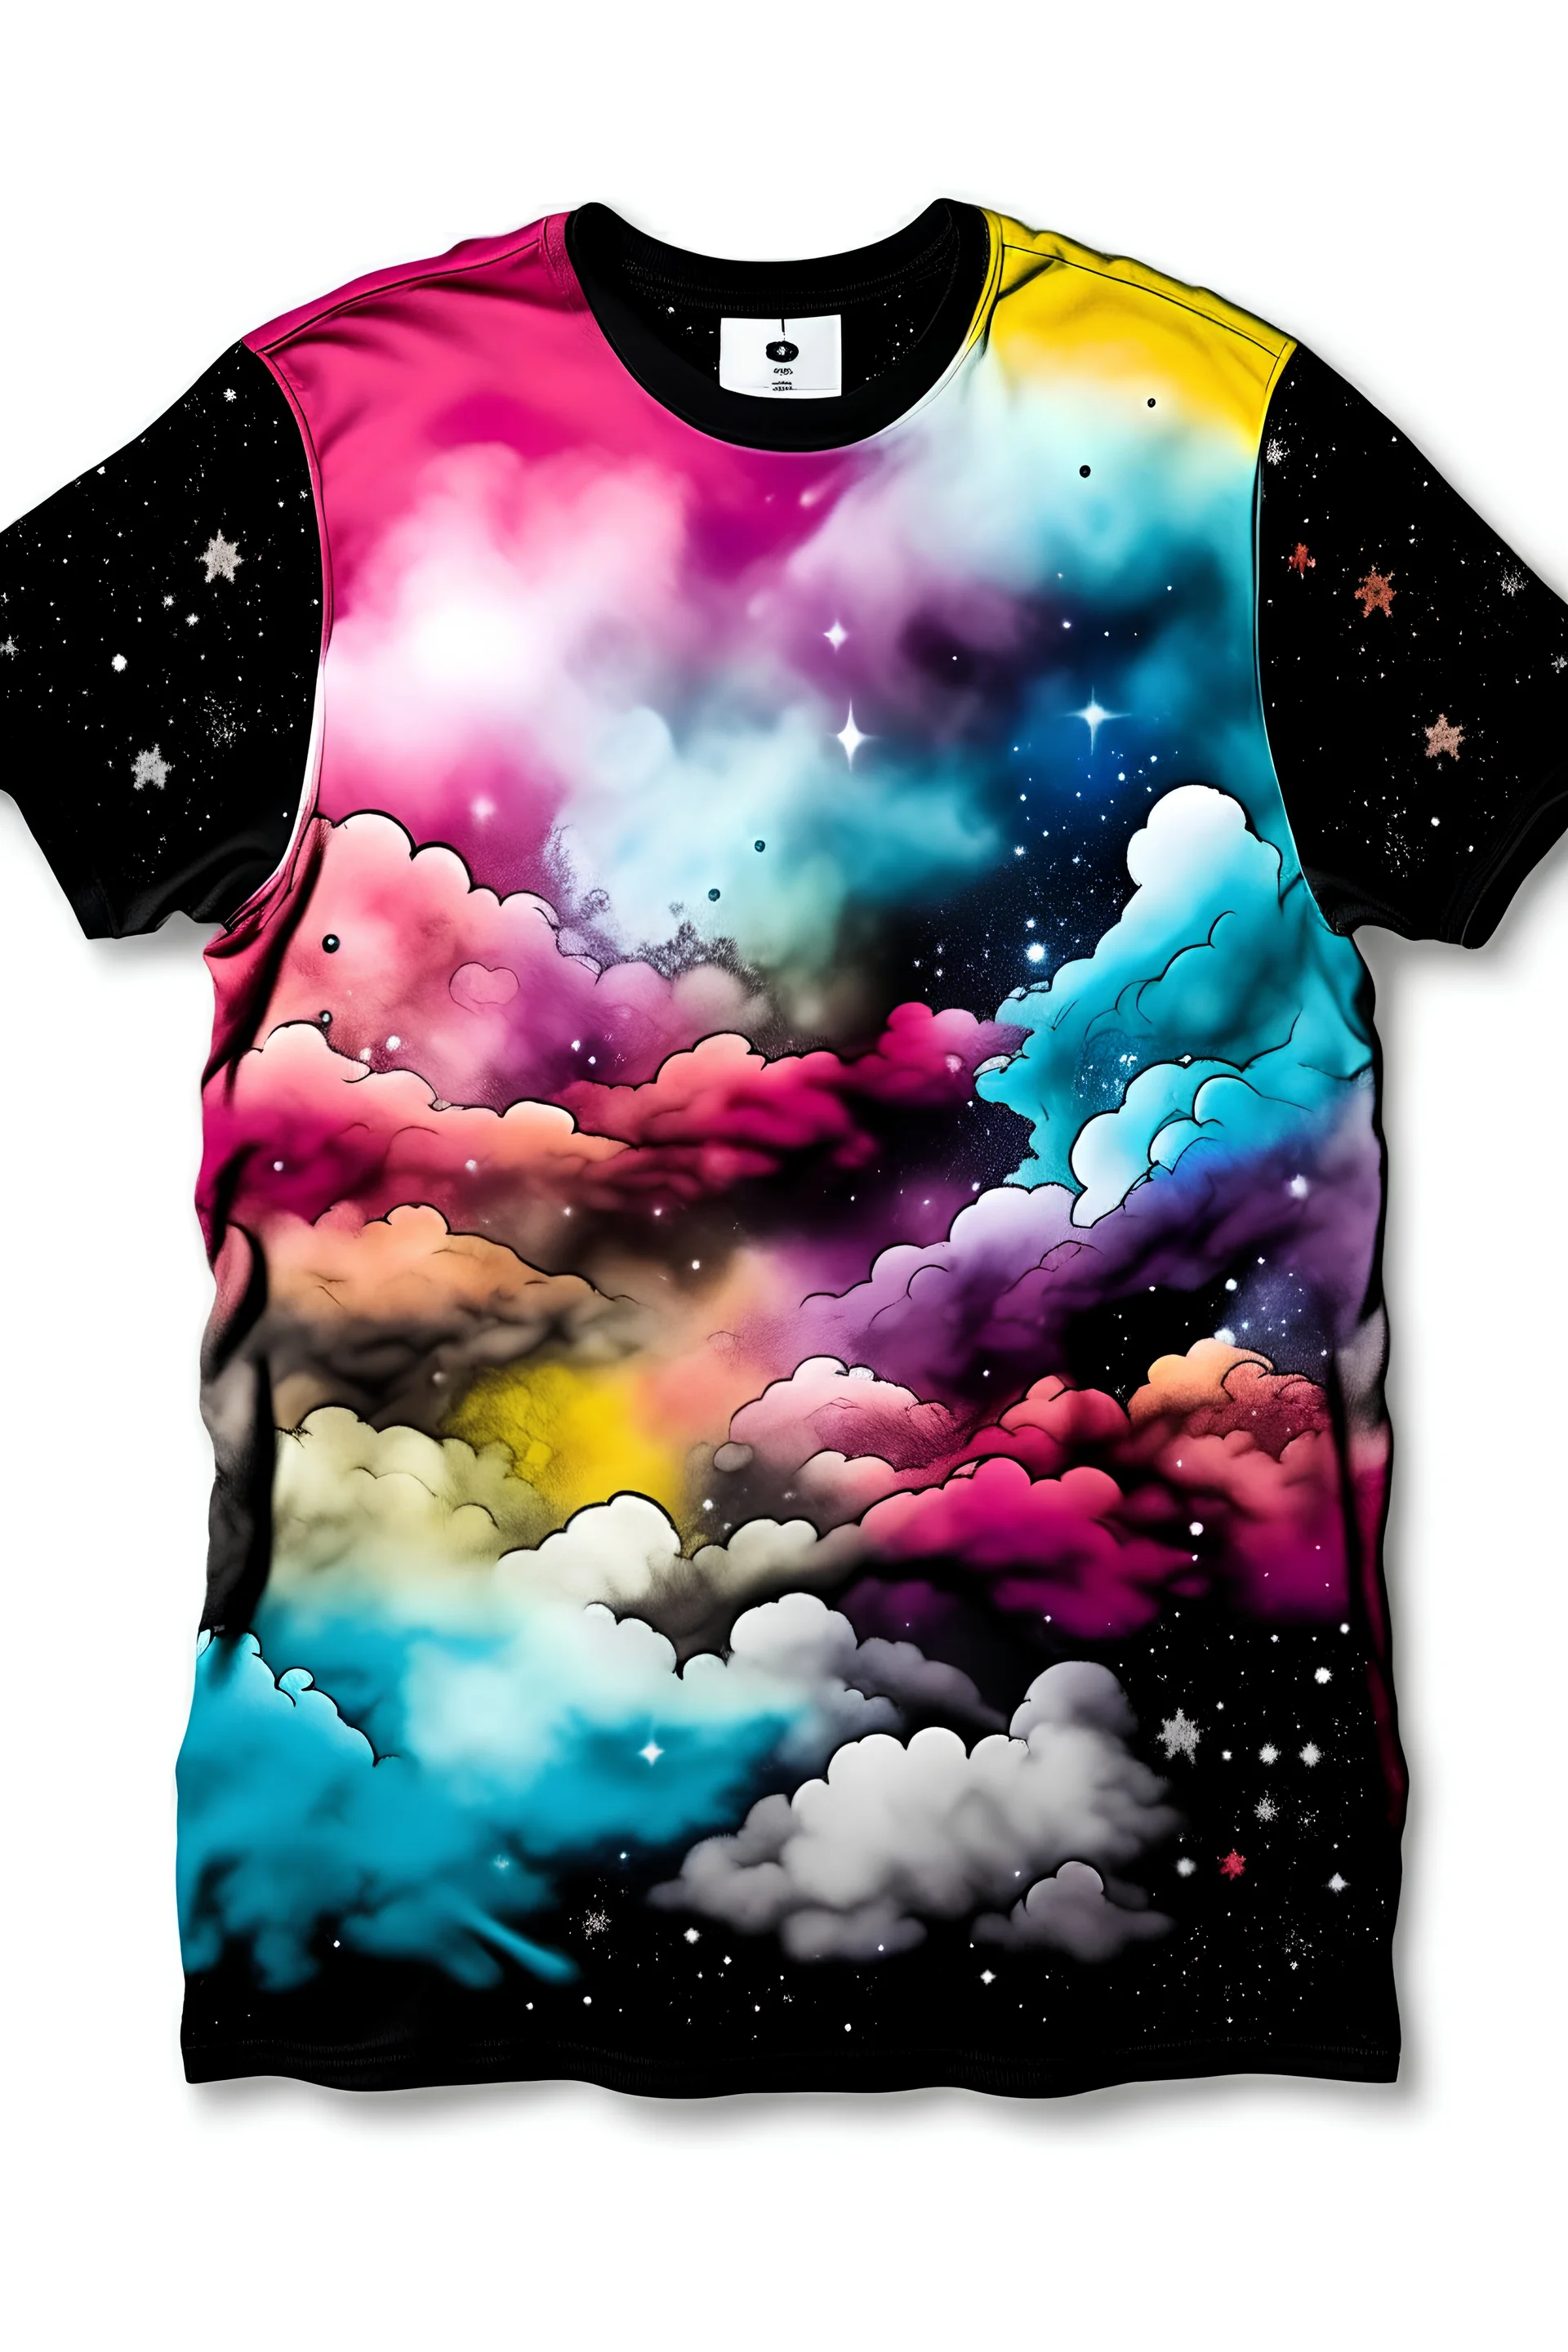 Fashion a gravity-based t-shirt design with a nebula's colorful clouds swirling in space. with light color background